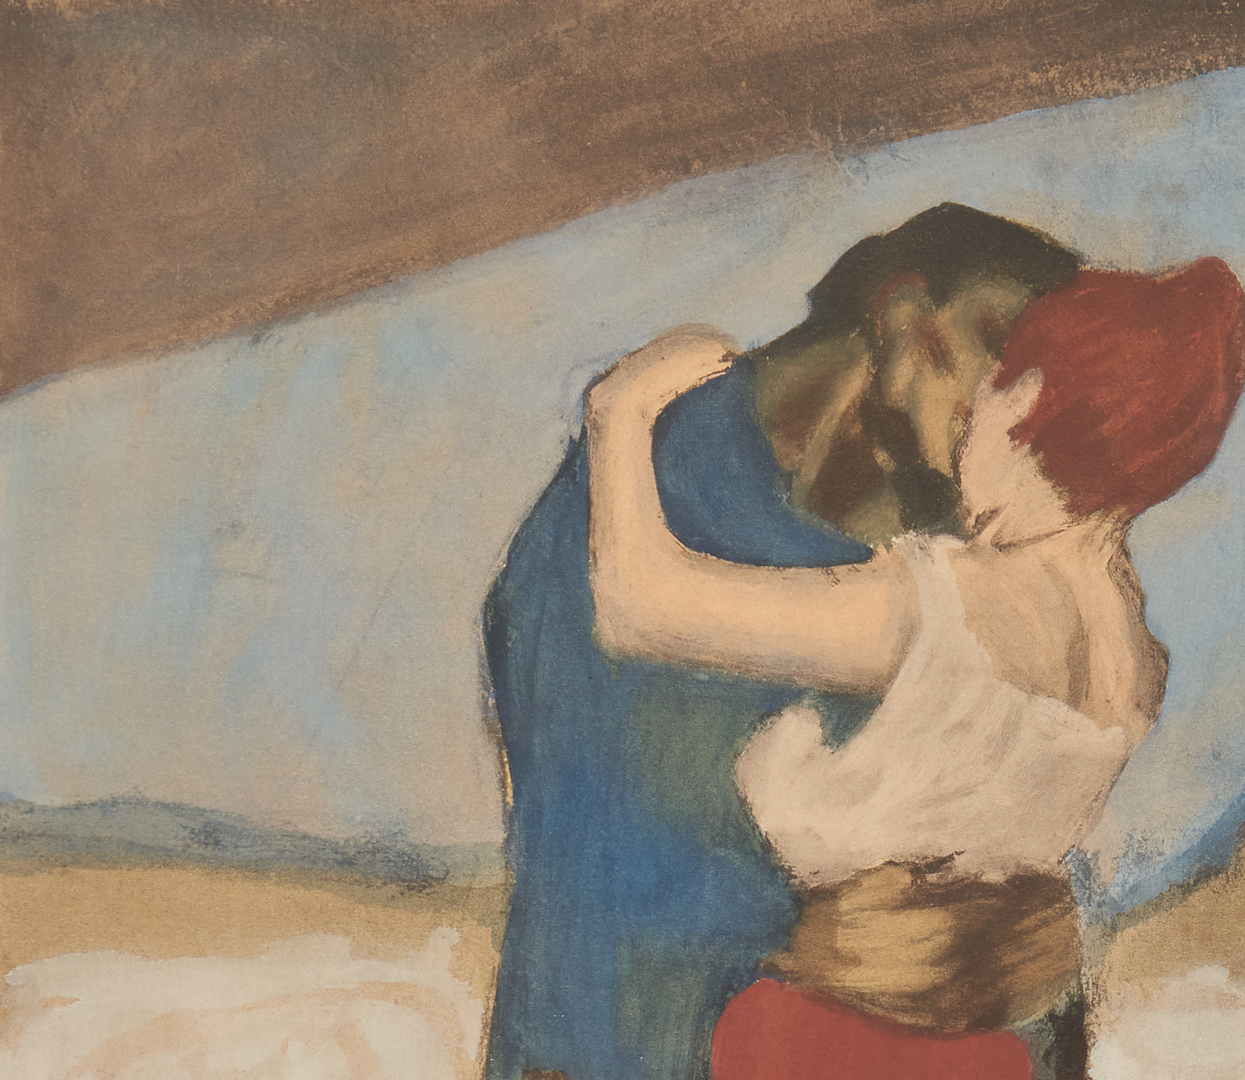 Lot 554: After Pablo Picasso Lithograph, The Embrace